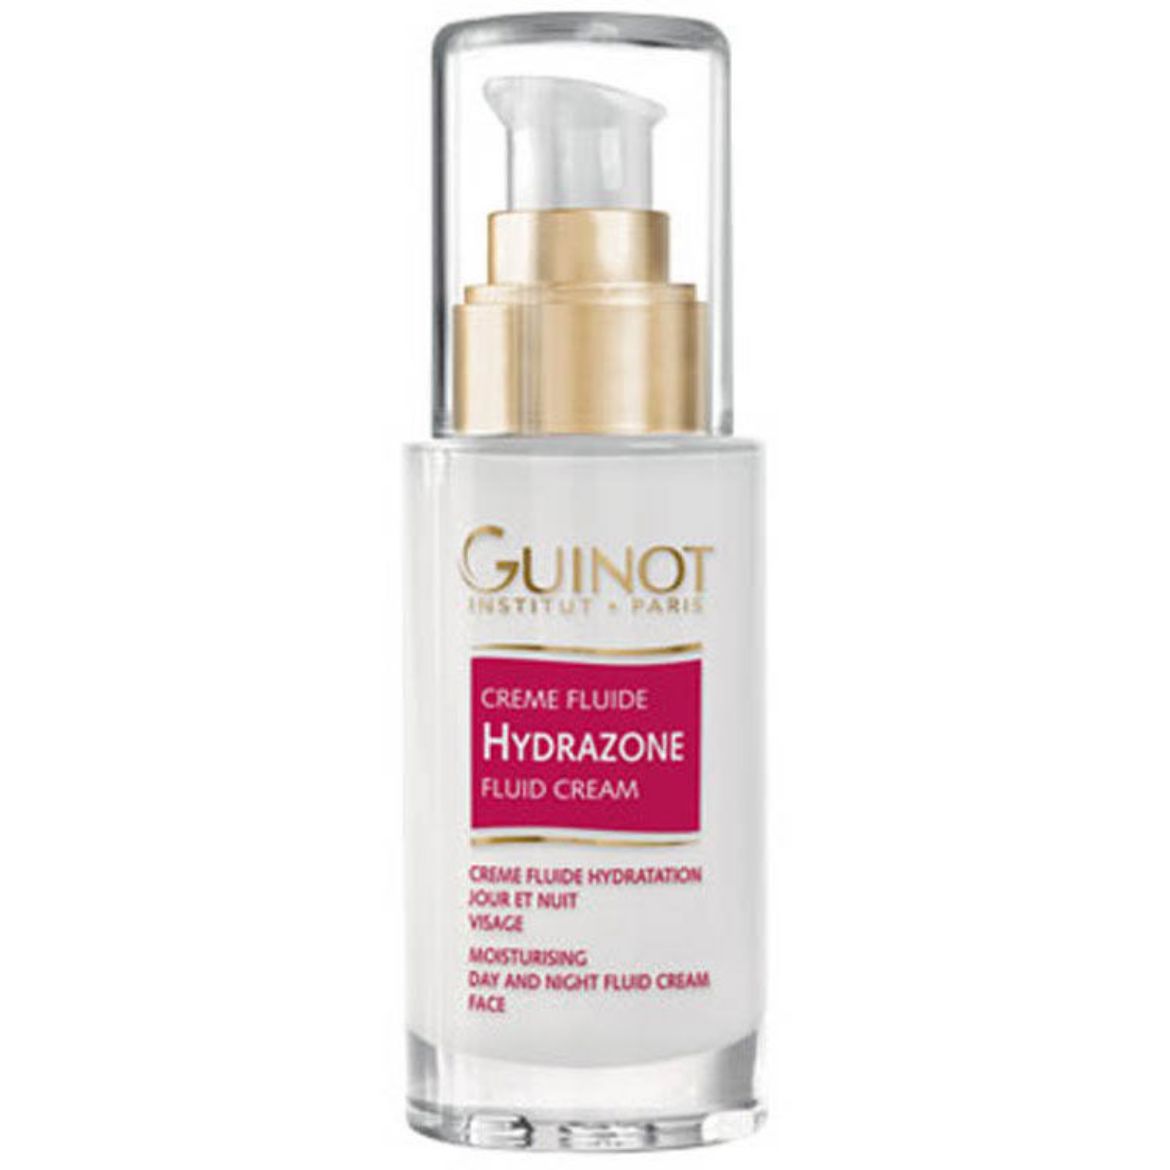 Image of Guinot Creme Fluide Hydrazone (50ml)